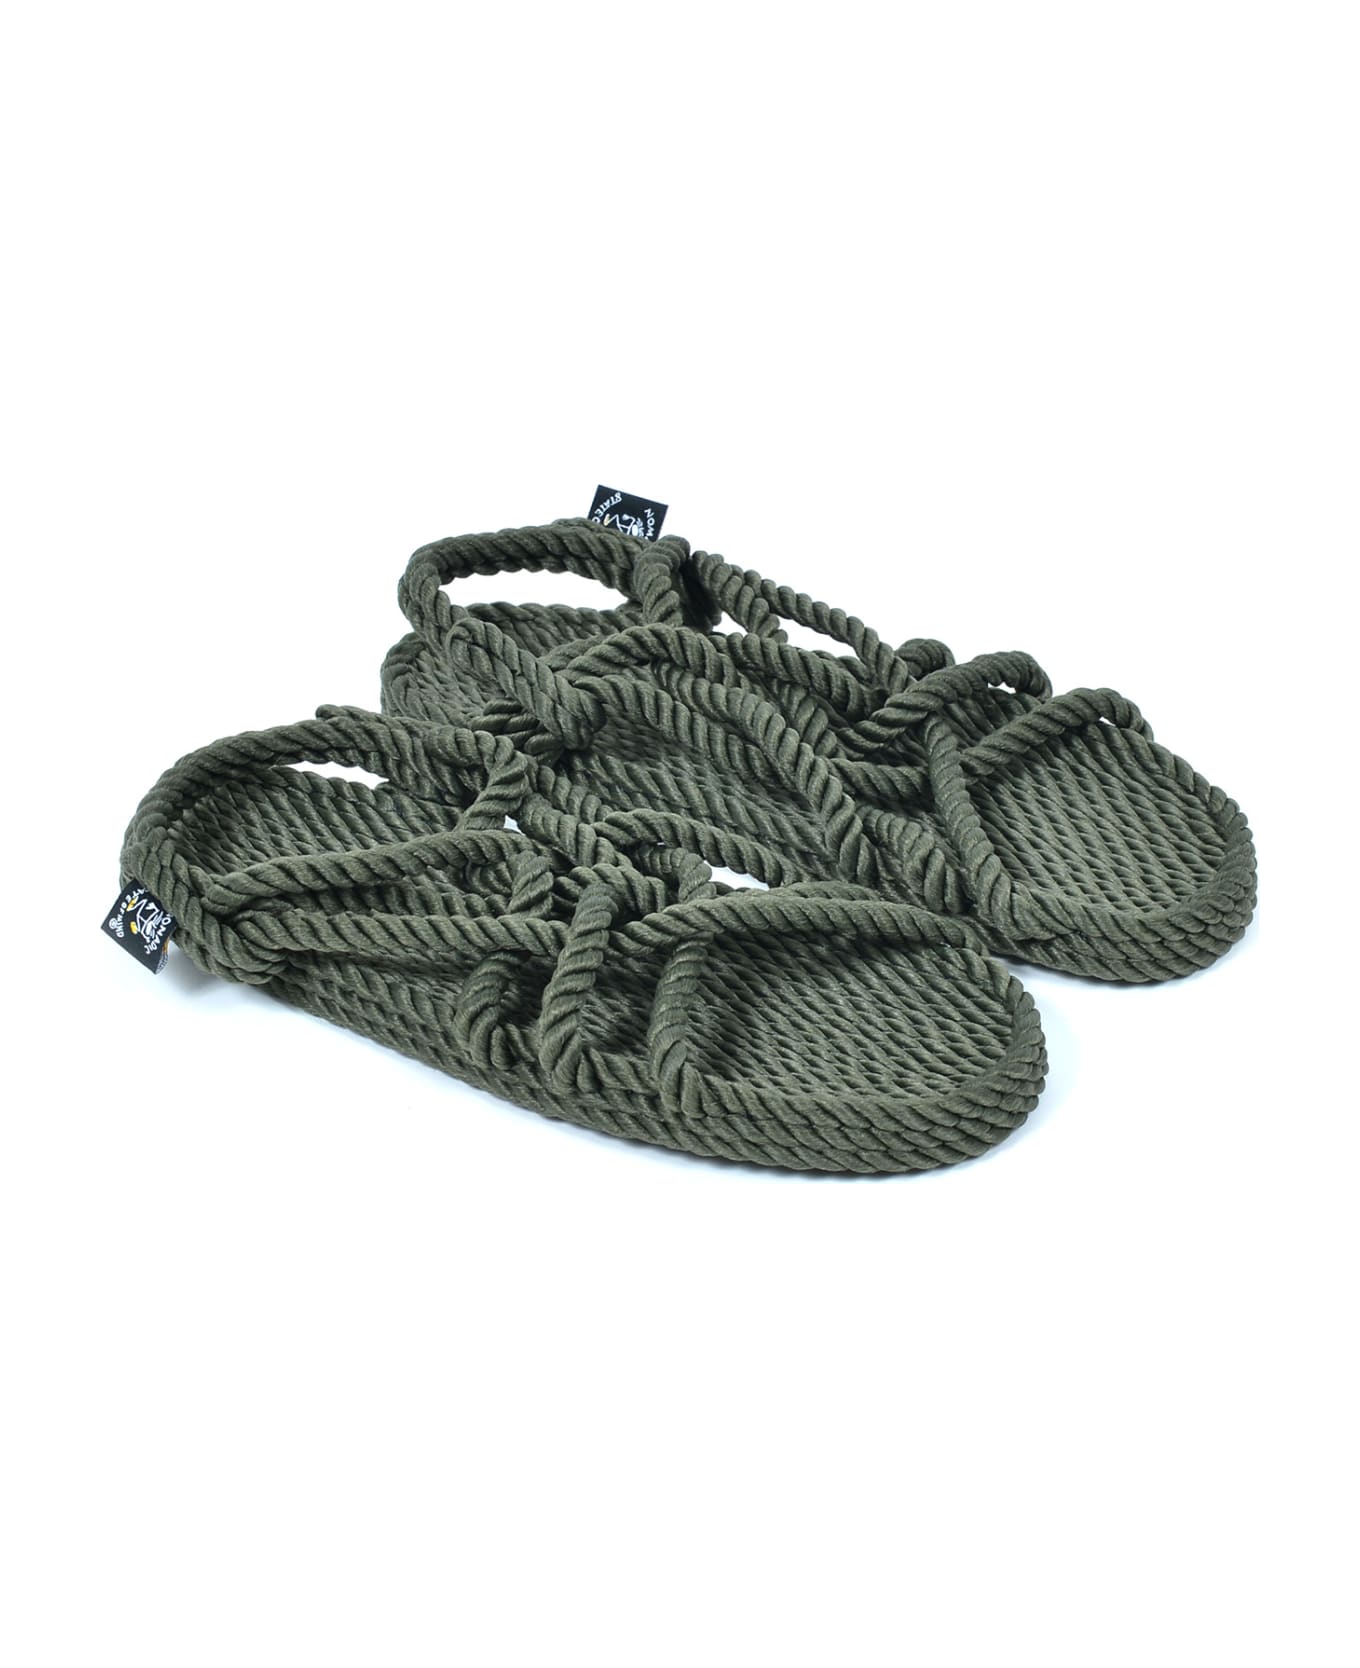 Nomadic State of Mind Sandals - MIlitary Green